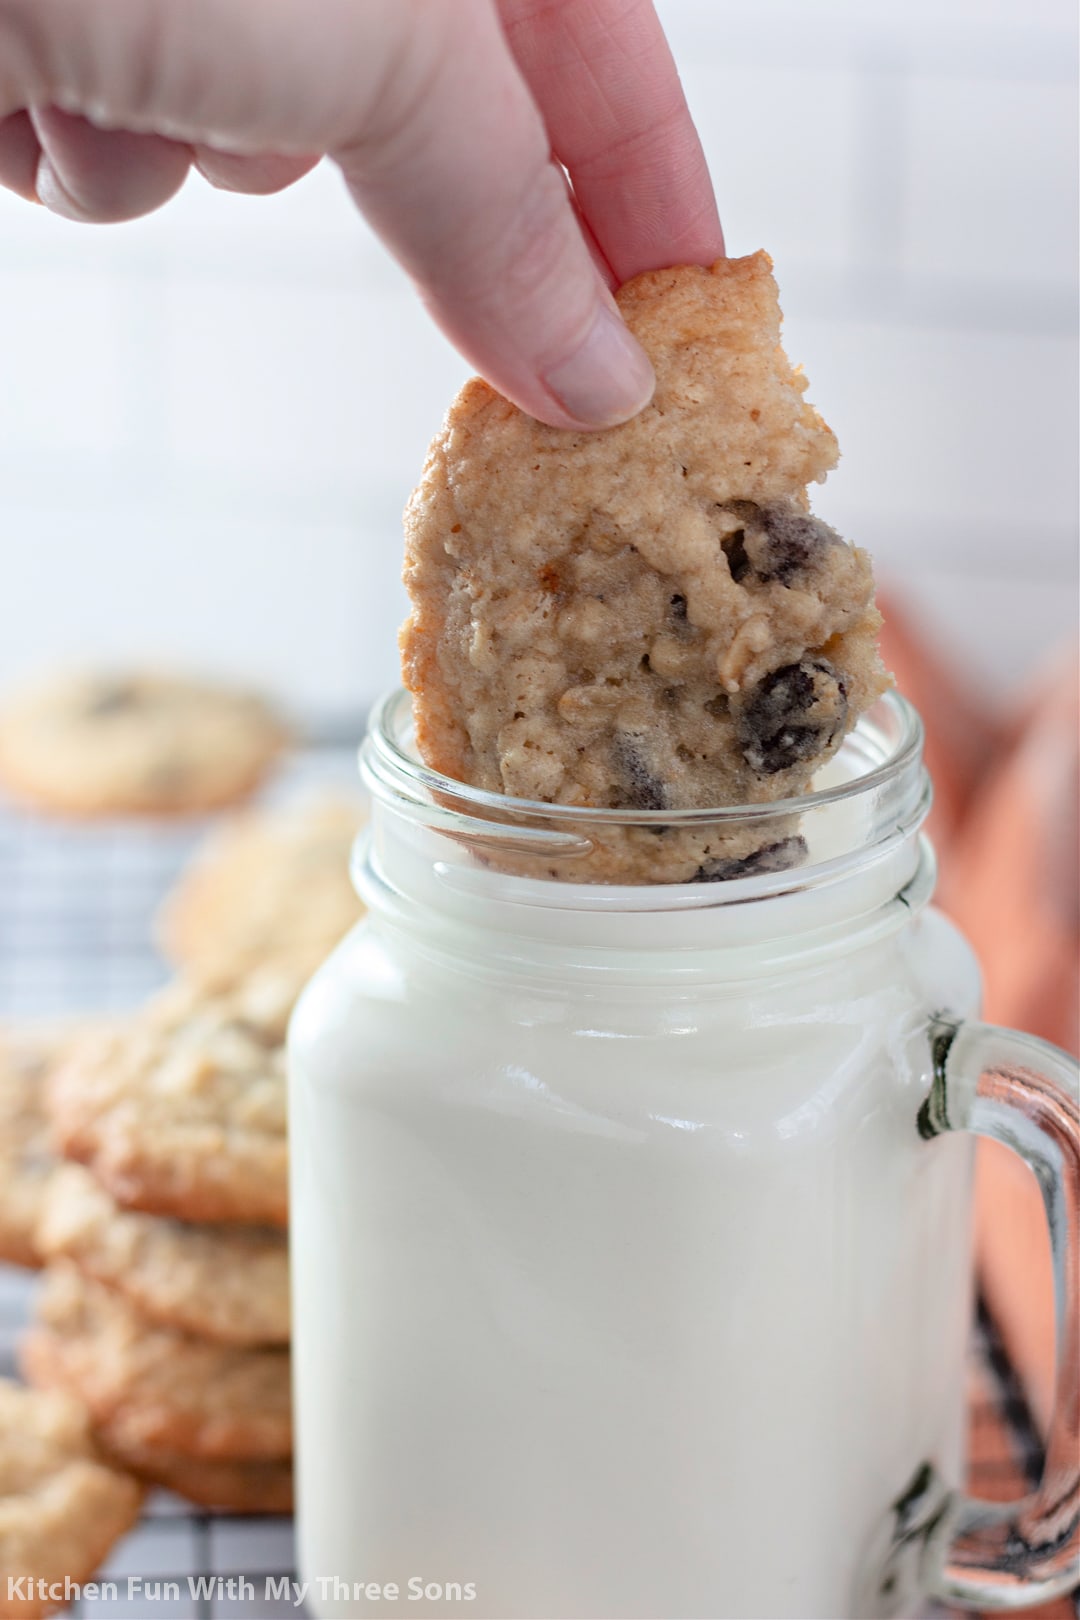 dipping an oatmeal cookie into a glass of milk.